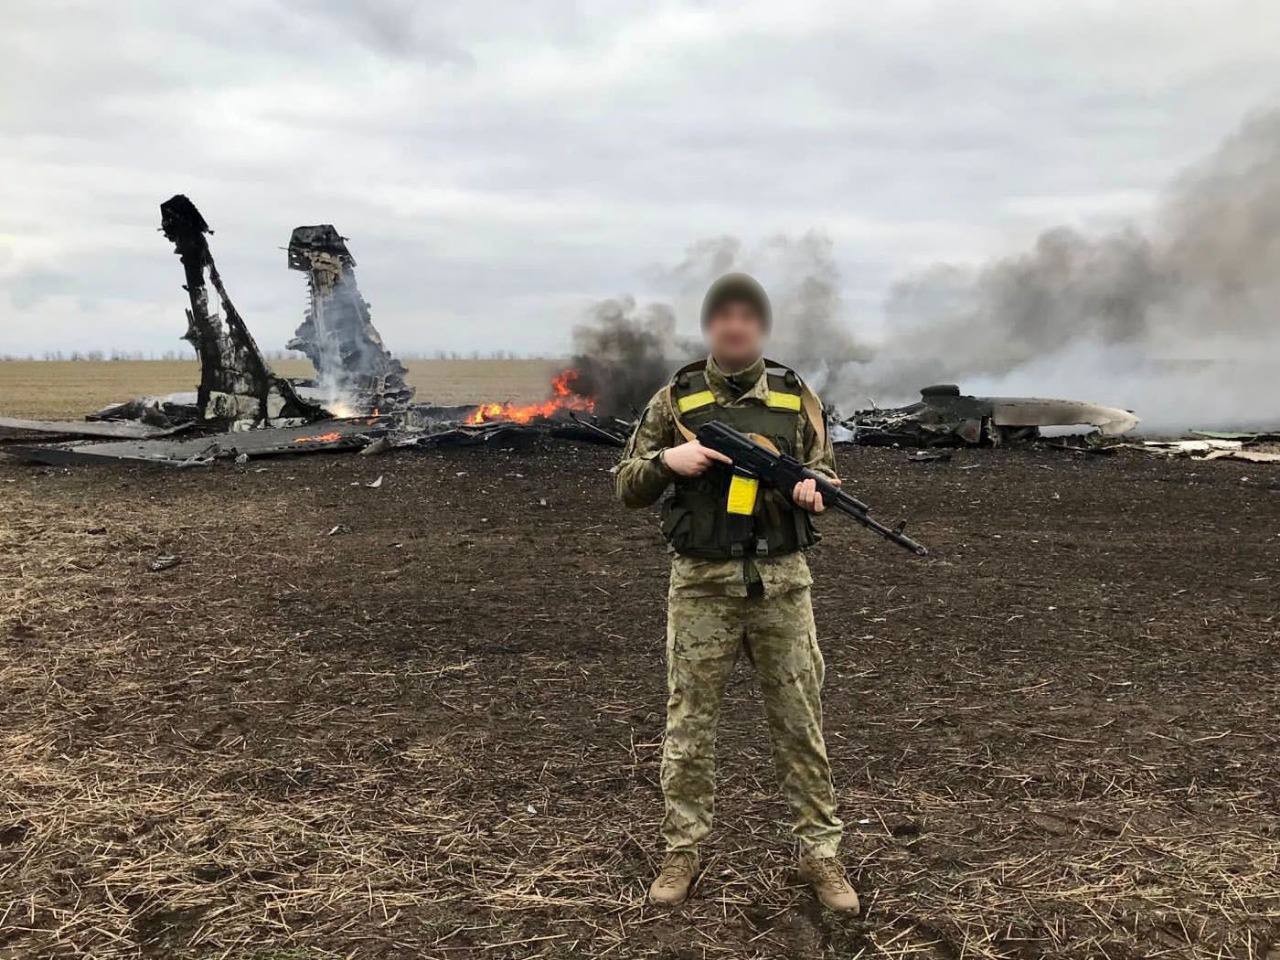 Burning remnants of a Su-30SM fighter downed in March 2022. Photo published on September 6, 2022